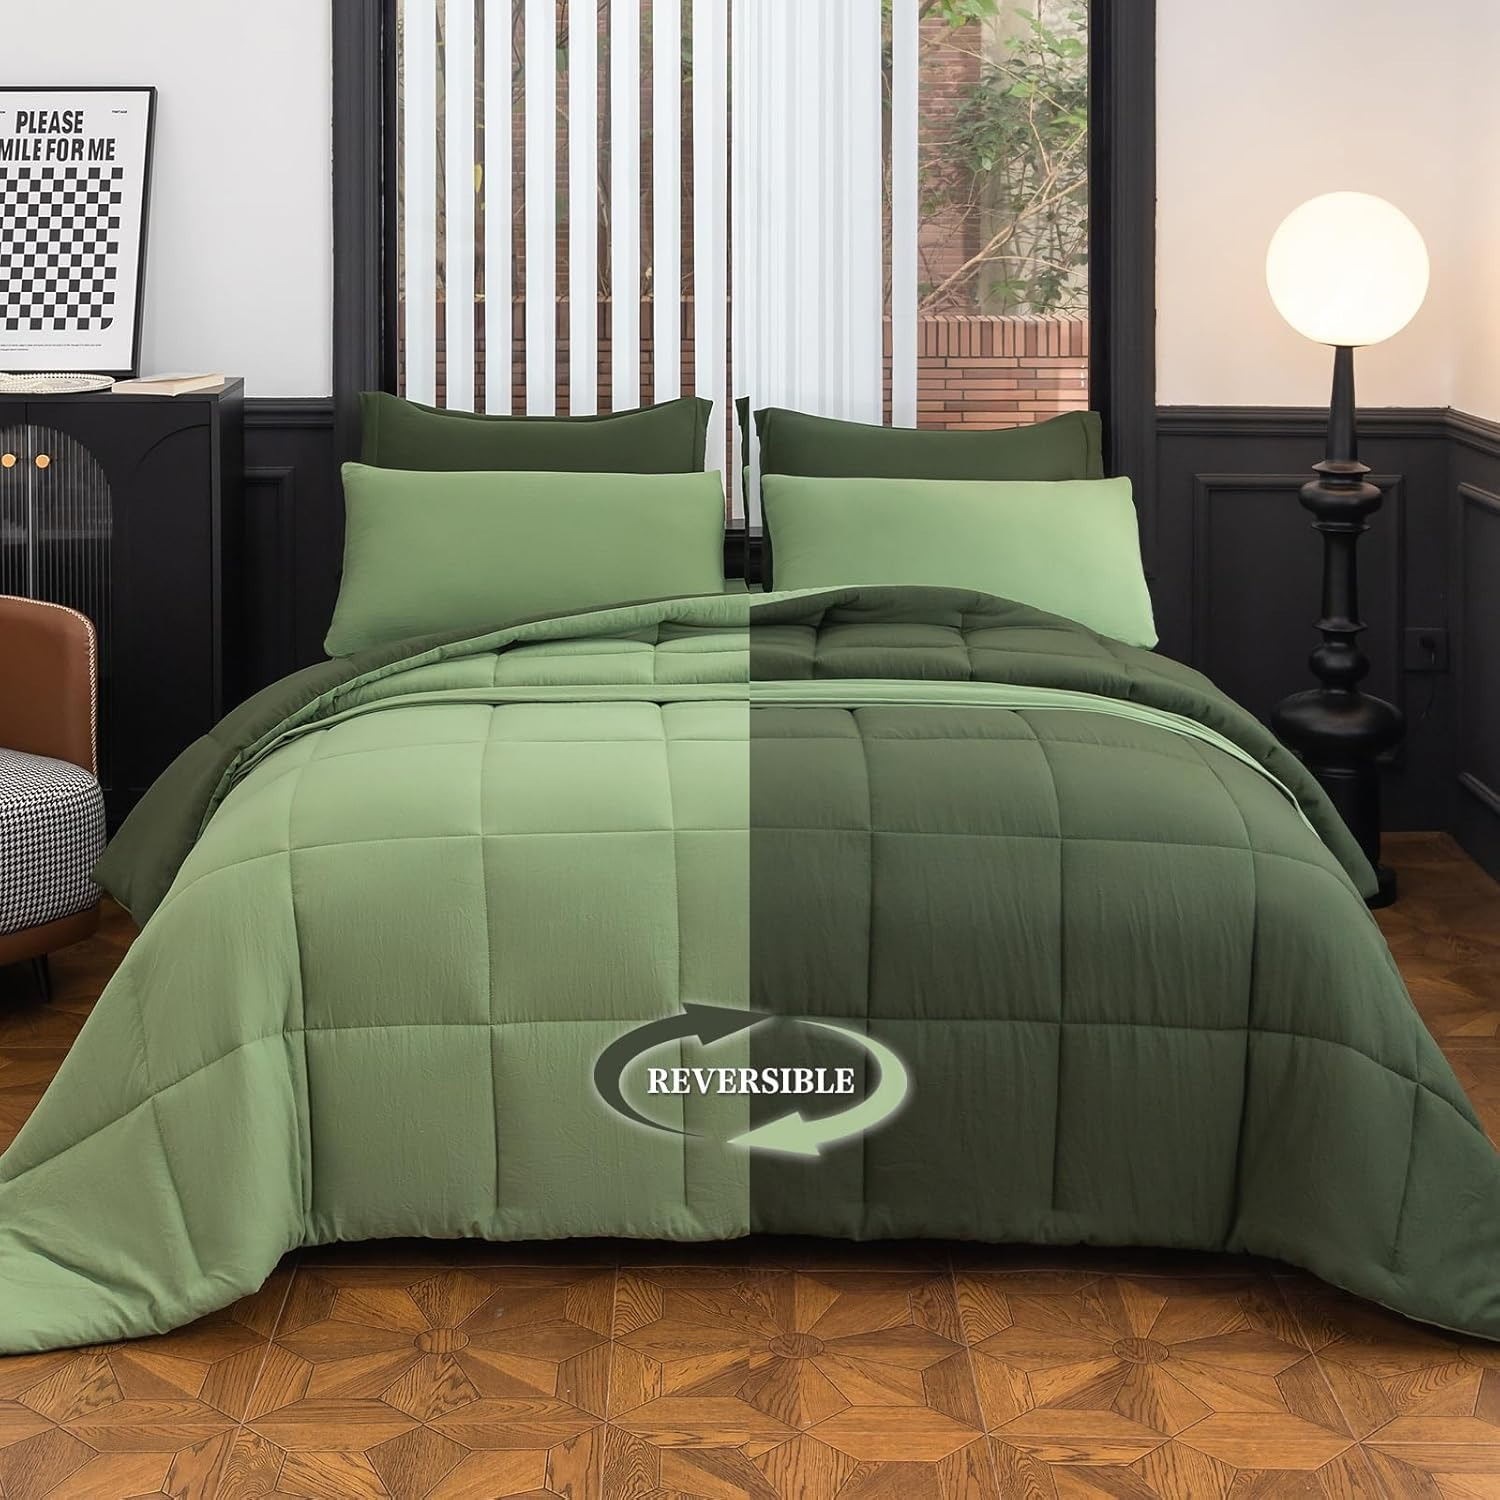 

Bed Skirt, Flat Sheet, Fitted Sheet, Pillowcase And Pillow Sham, Comforter Sets, 8 Piece Bed In A Bag Dark Green Bedding Sets With Box Stitched Lightweight Reversible Quilt